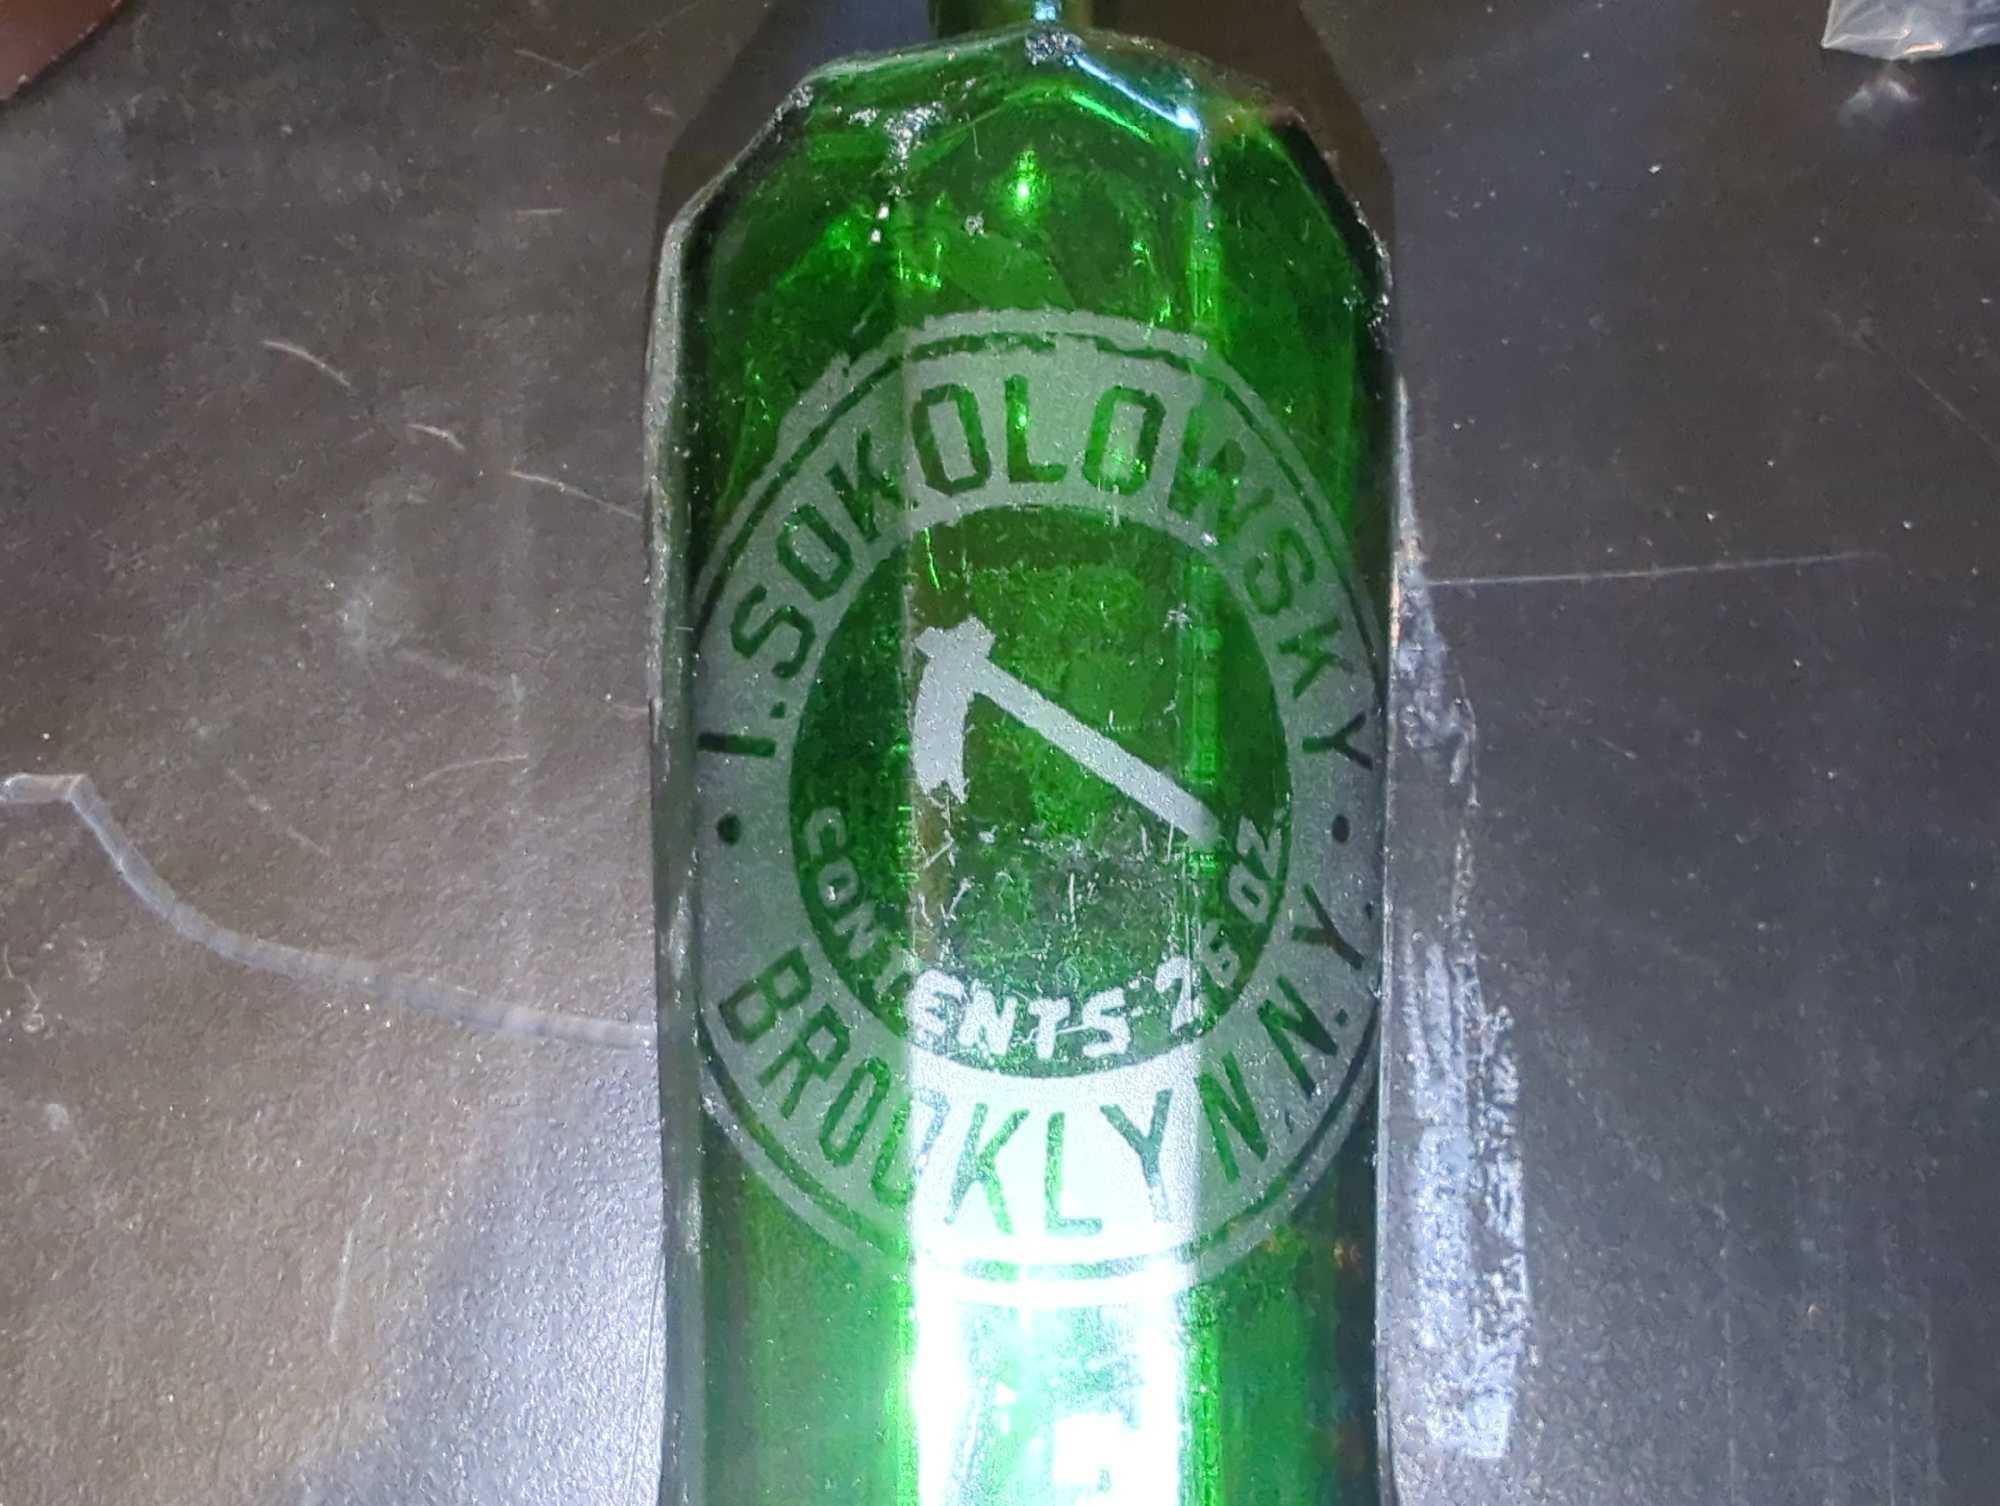 (BR3) OLD STYLE GREEN SOKOLOWSKY GLASS, 26 OZ, 10" HEIGHT, WHAT YOU SEE IN THE PHOTOS IS EXACTLY